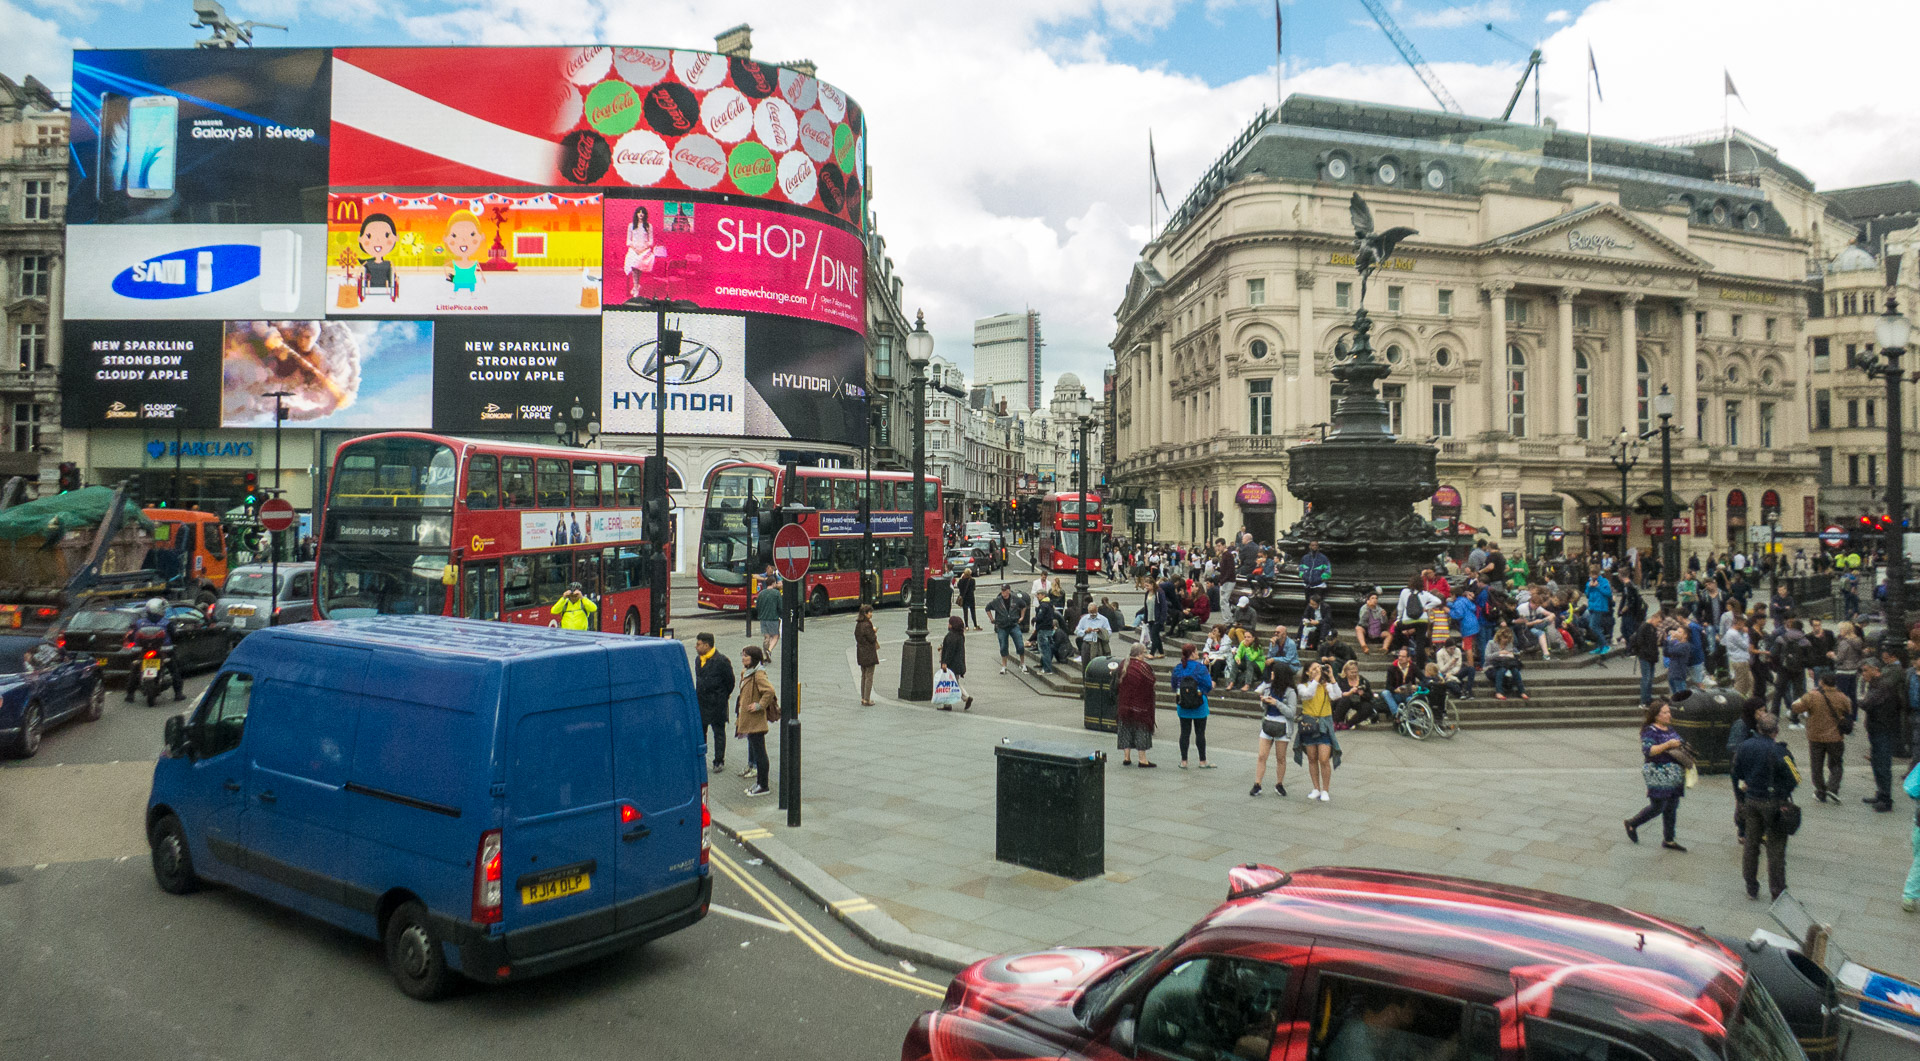 Piccadillly Circus from a double decker bus in London